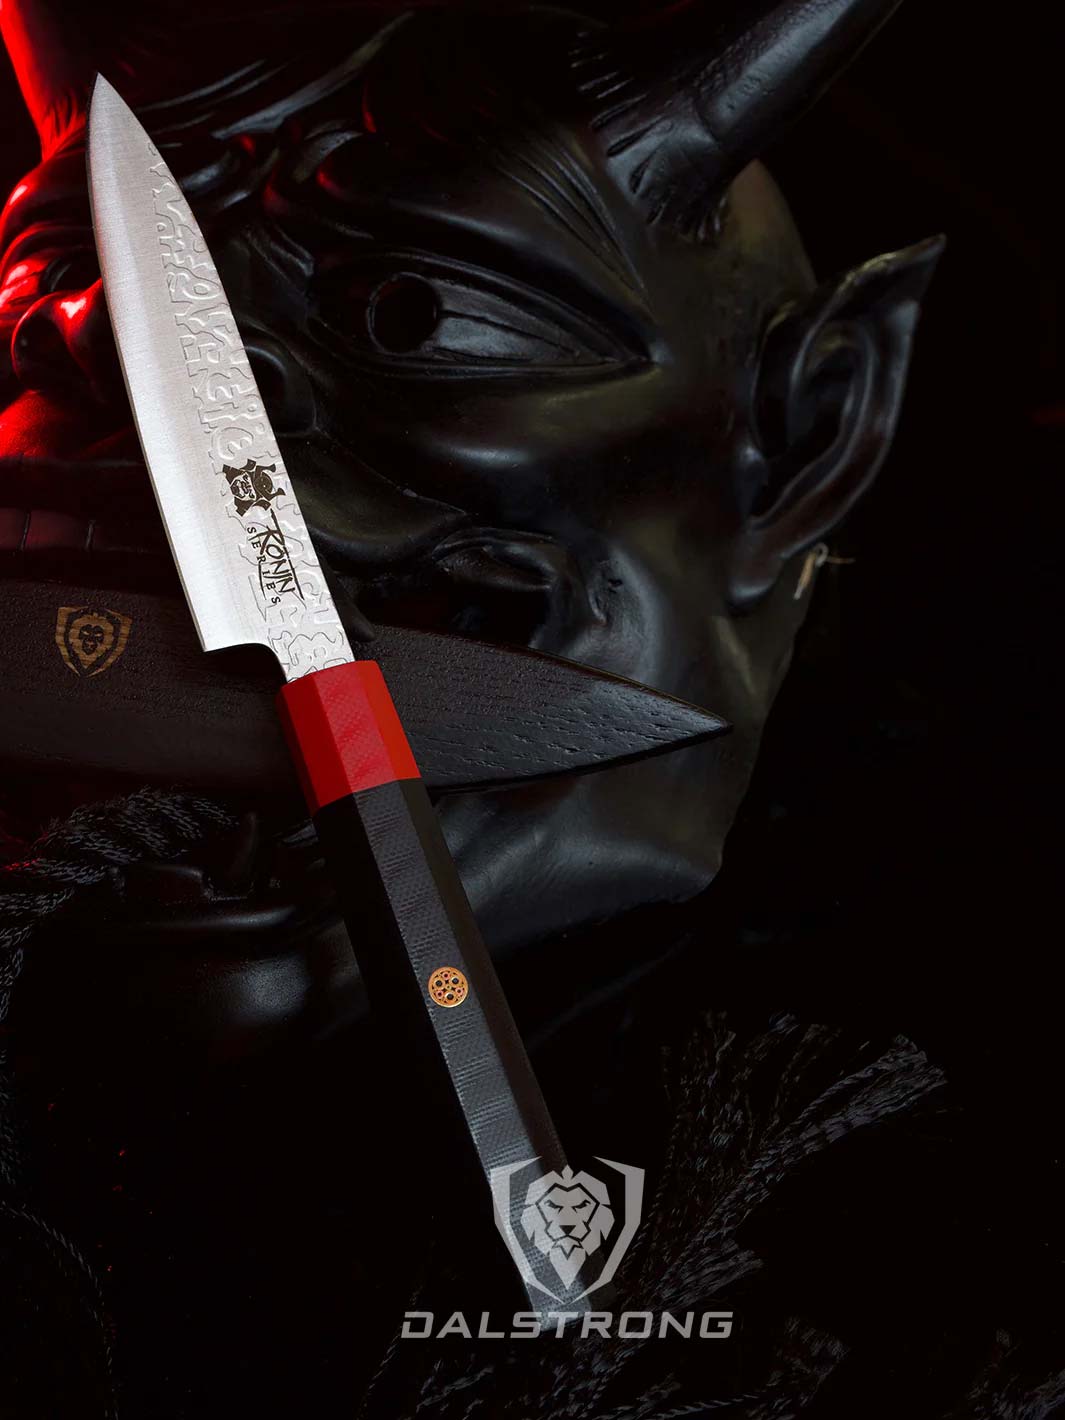 Dalstrong ronin series 4.5 inch paring knife with black handle beside a oni mask.